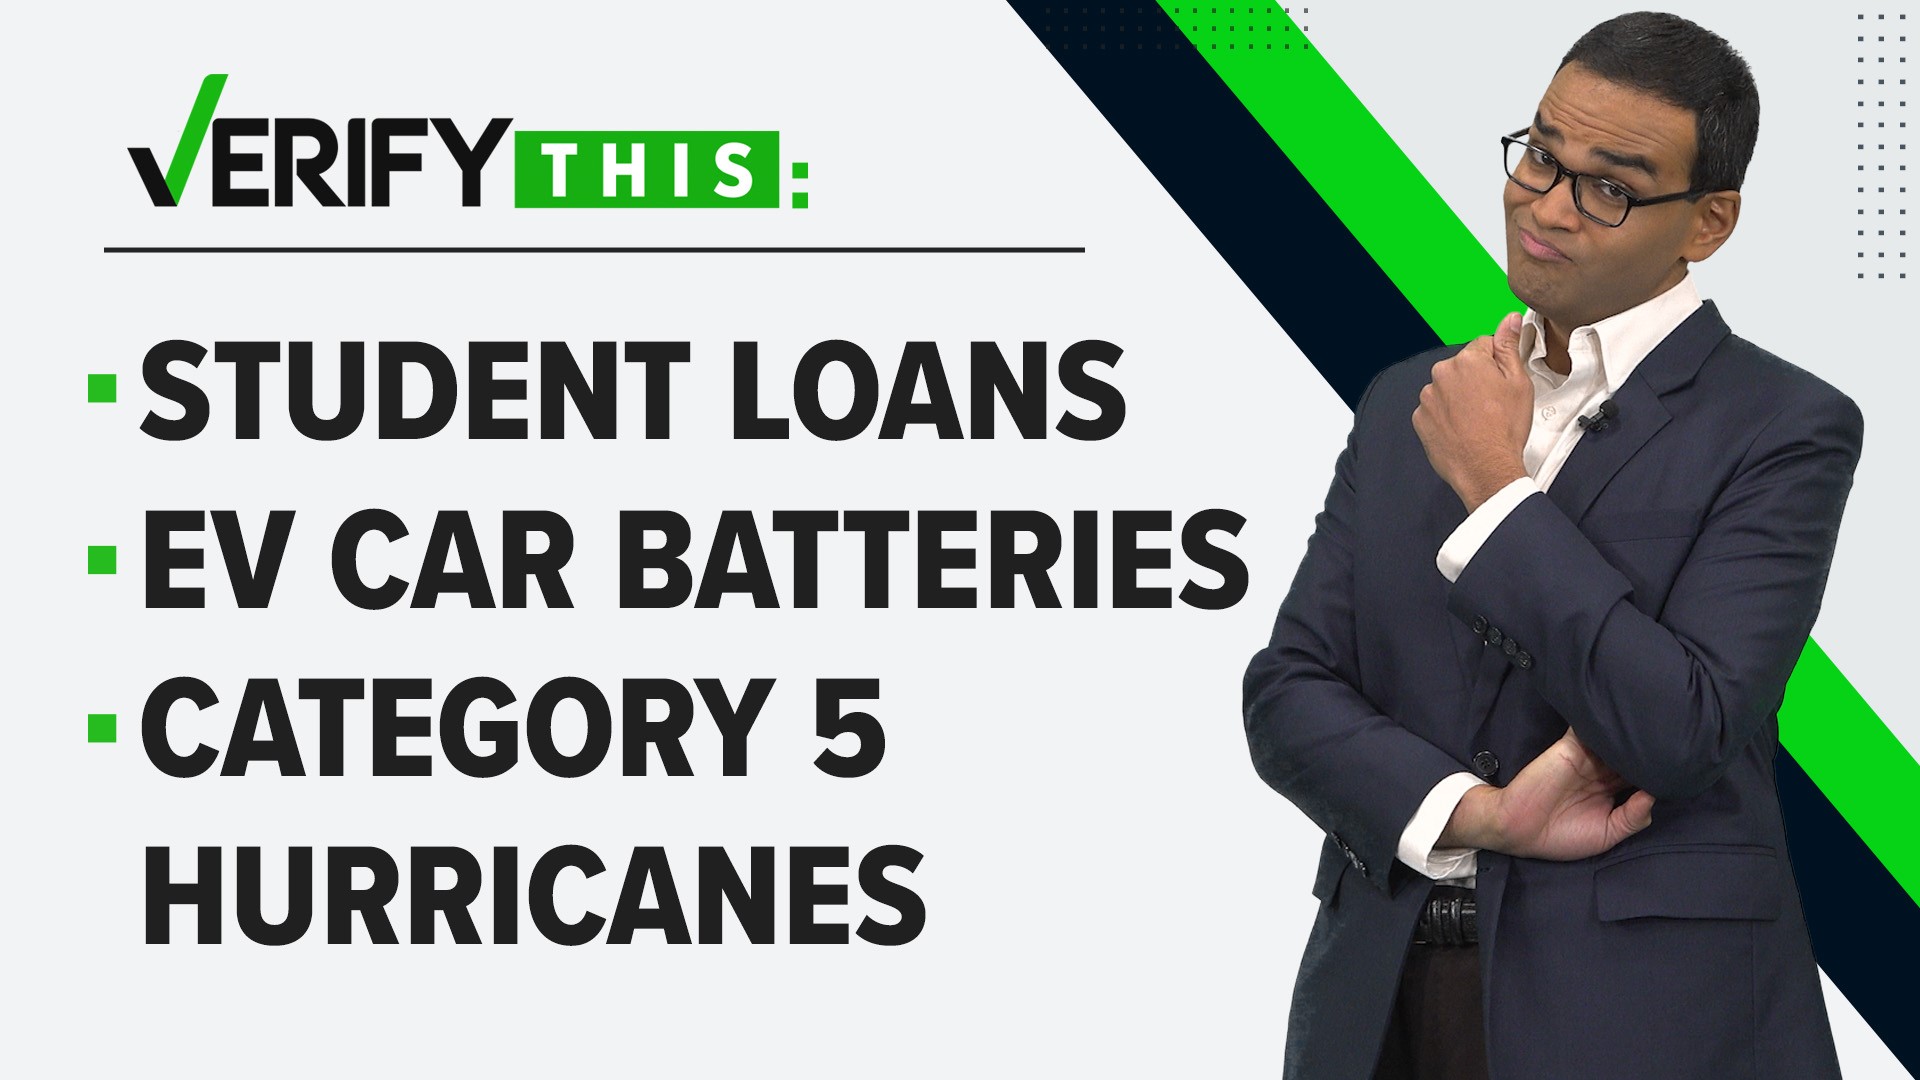 Fact checking claims about student loan forgiveness, EV car batteries and Category 5 hurricanes.